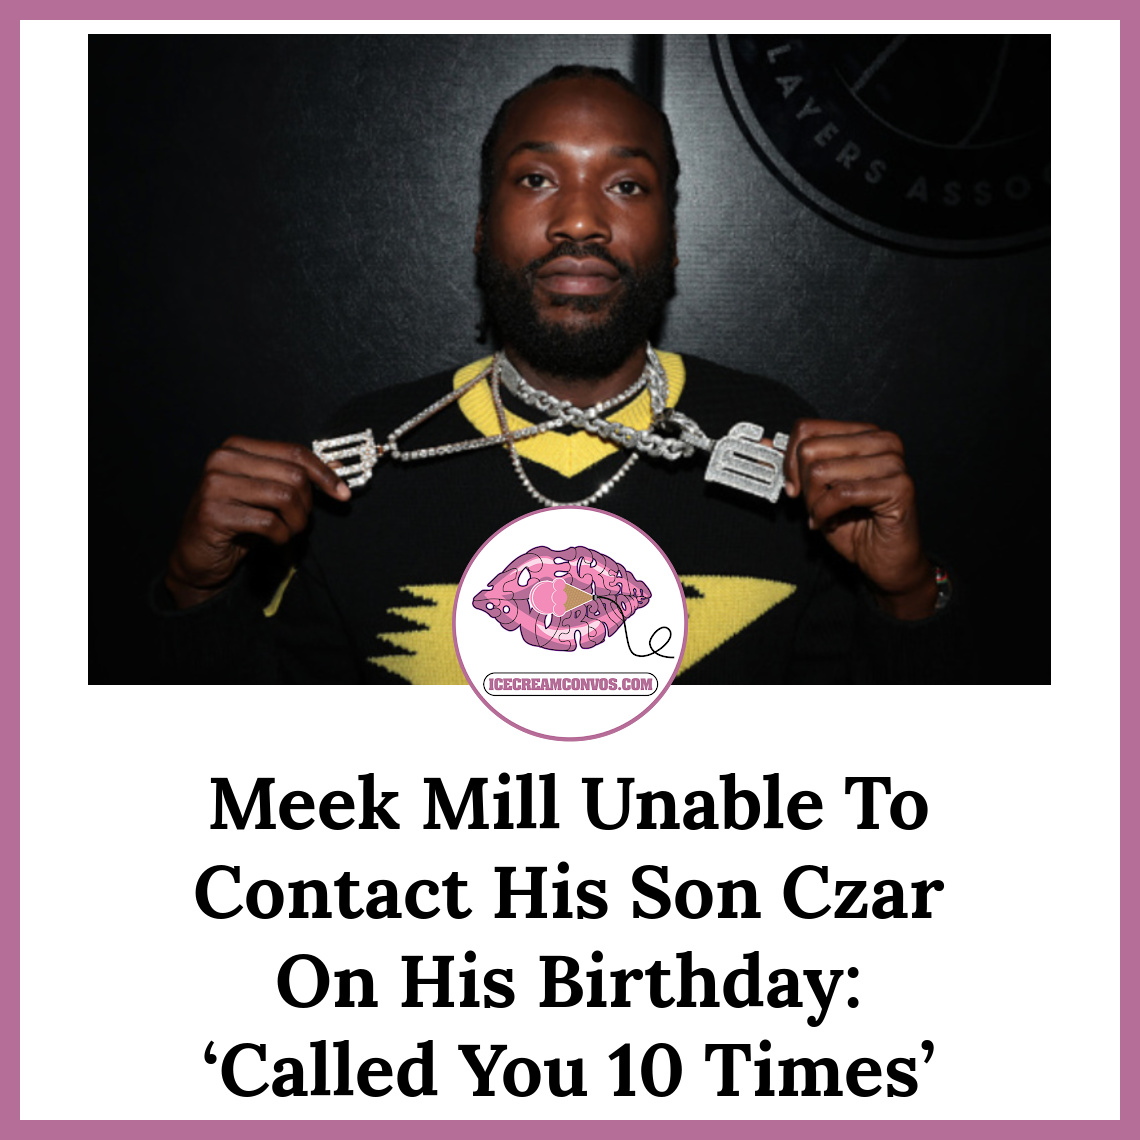 Meek Mill took to Twitter to wish his 4-year-old son, Czar, a Happy Birthday after he was unable to contact him by phone. 🥳😔🖤🍦 bit.ly/44w9VmK

#MeekMill #Czar #QuickQuotes #IceCreamConvos